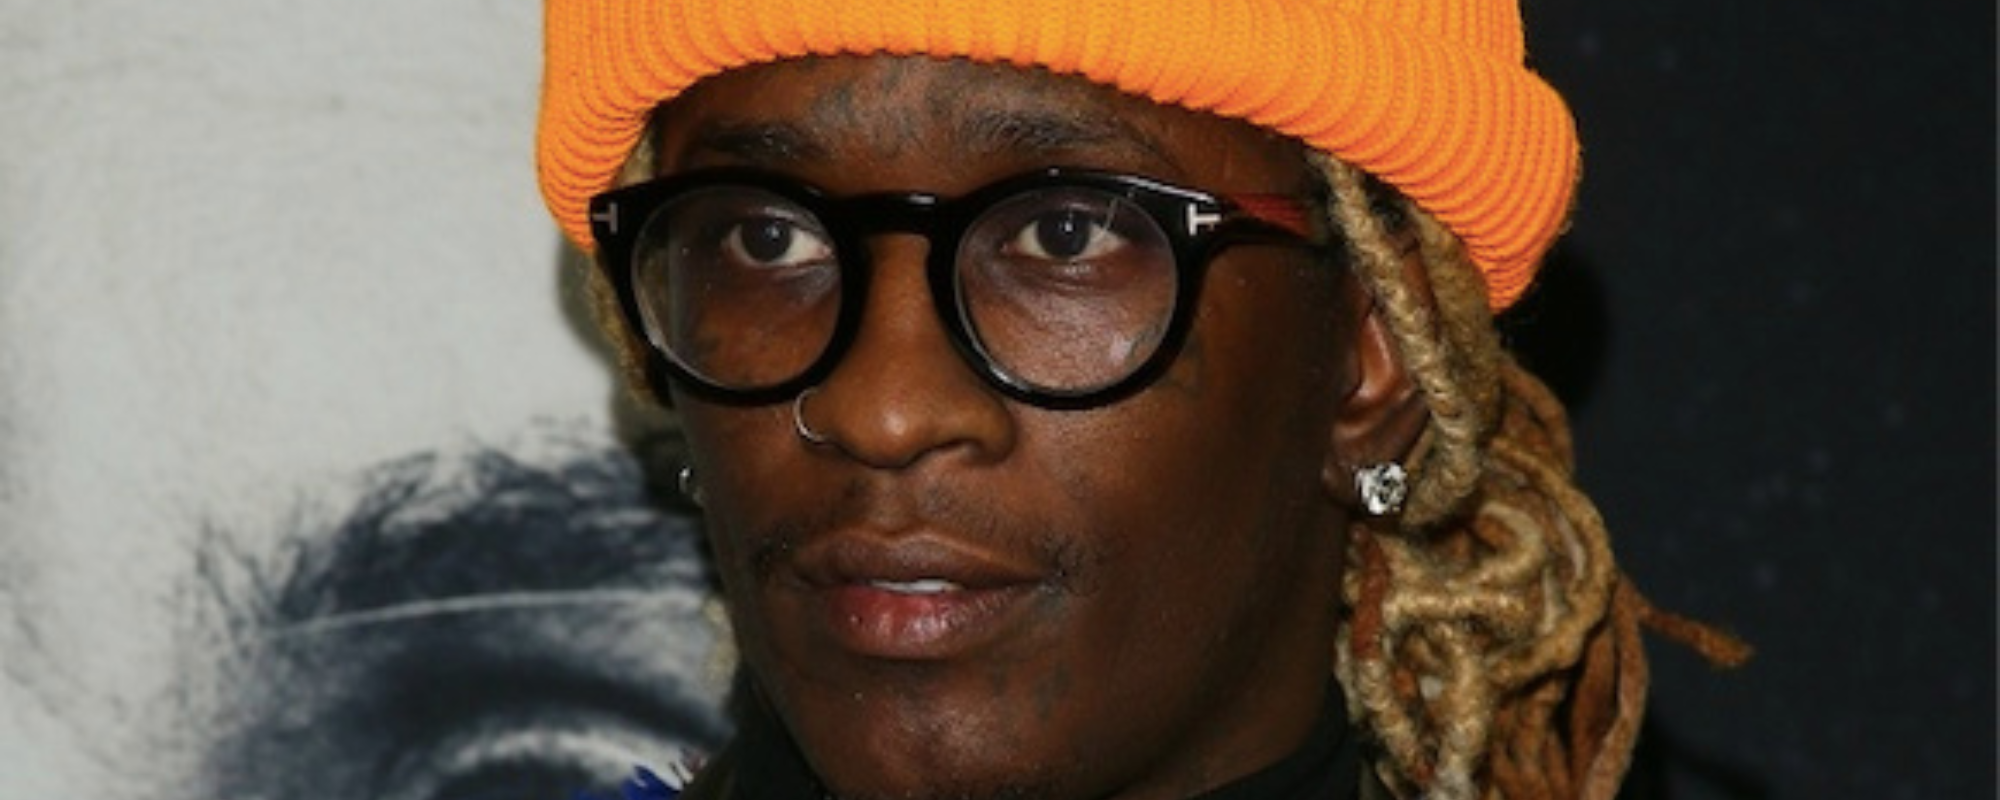 Recap: Days 3-5 of Young Thug’s Trial Include More Antics